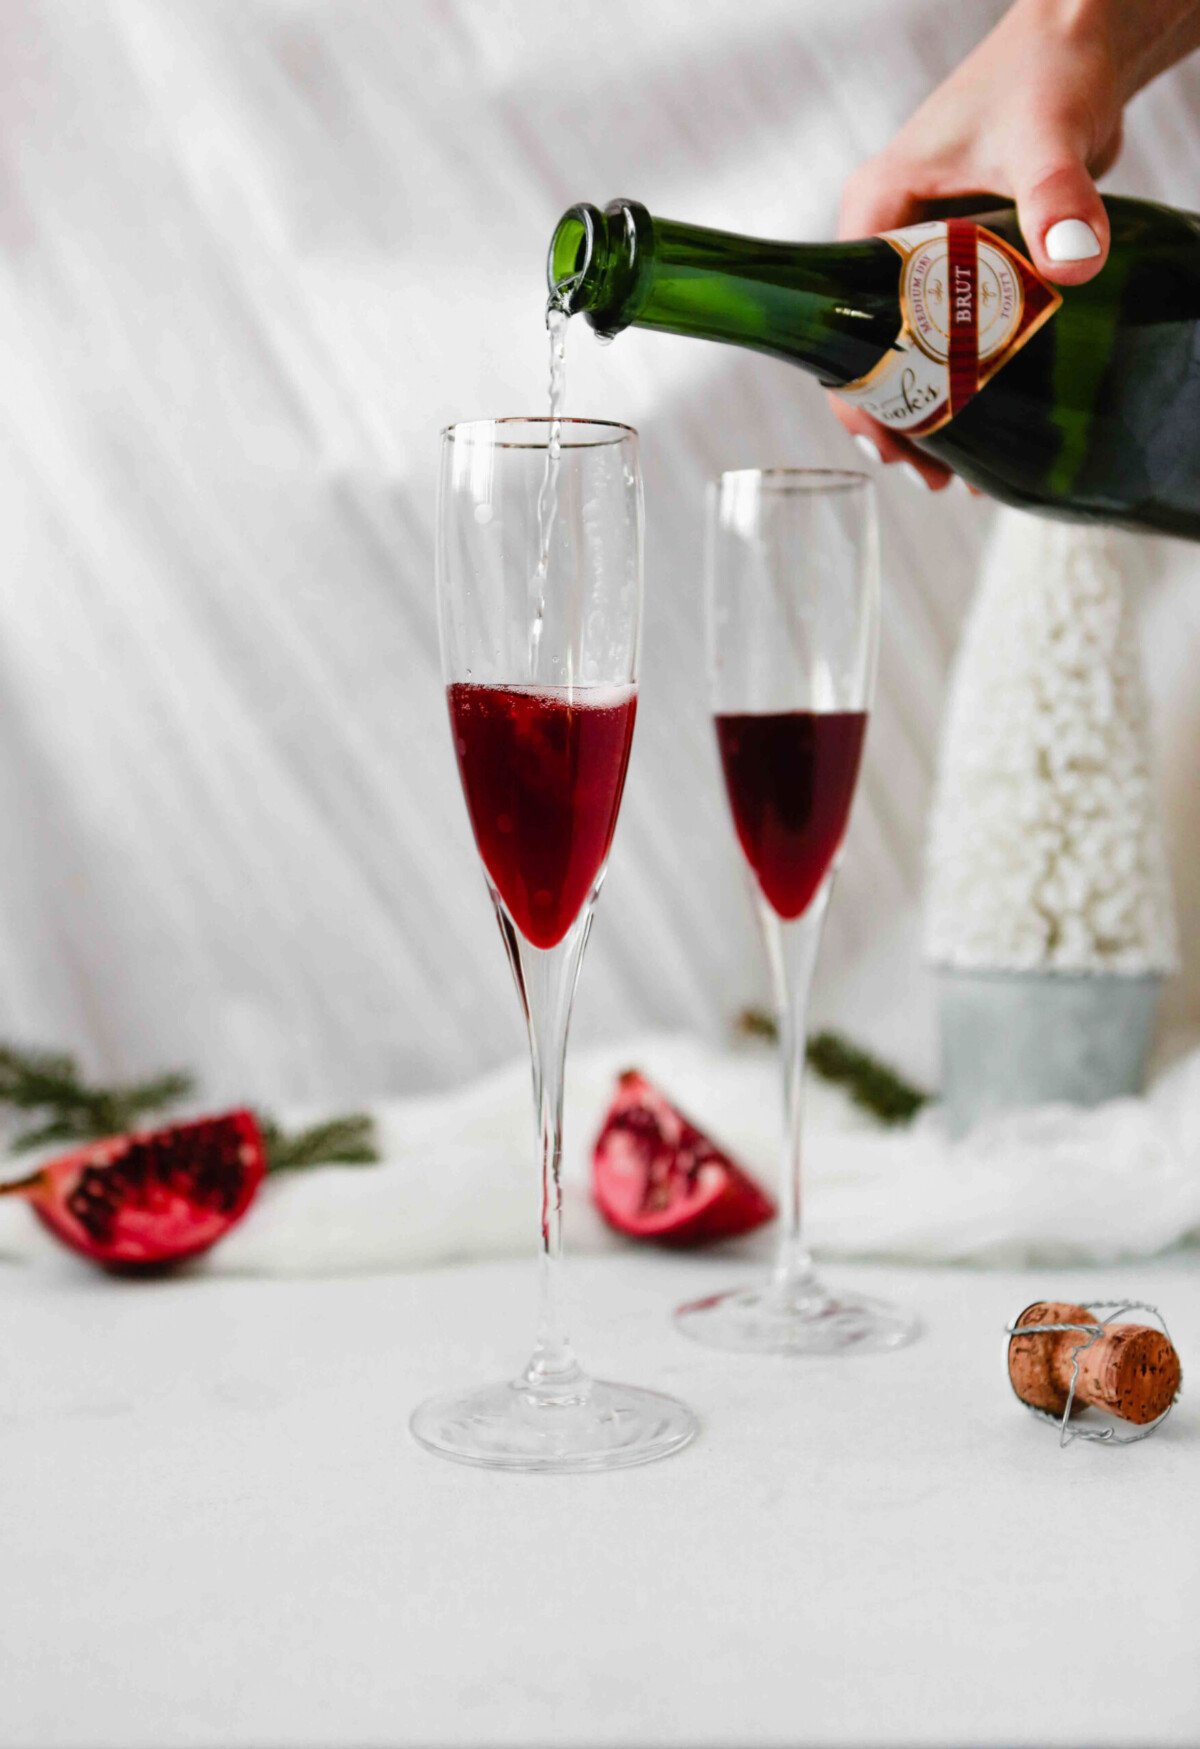 Photograph of sparkling wine being poured into champagne flutes with pomegranate liqueur